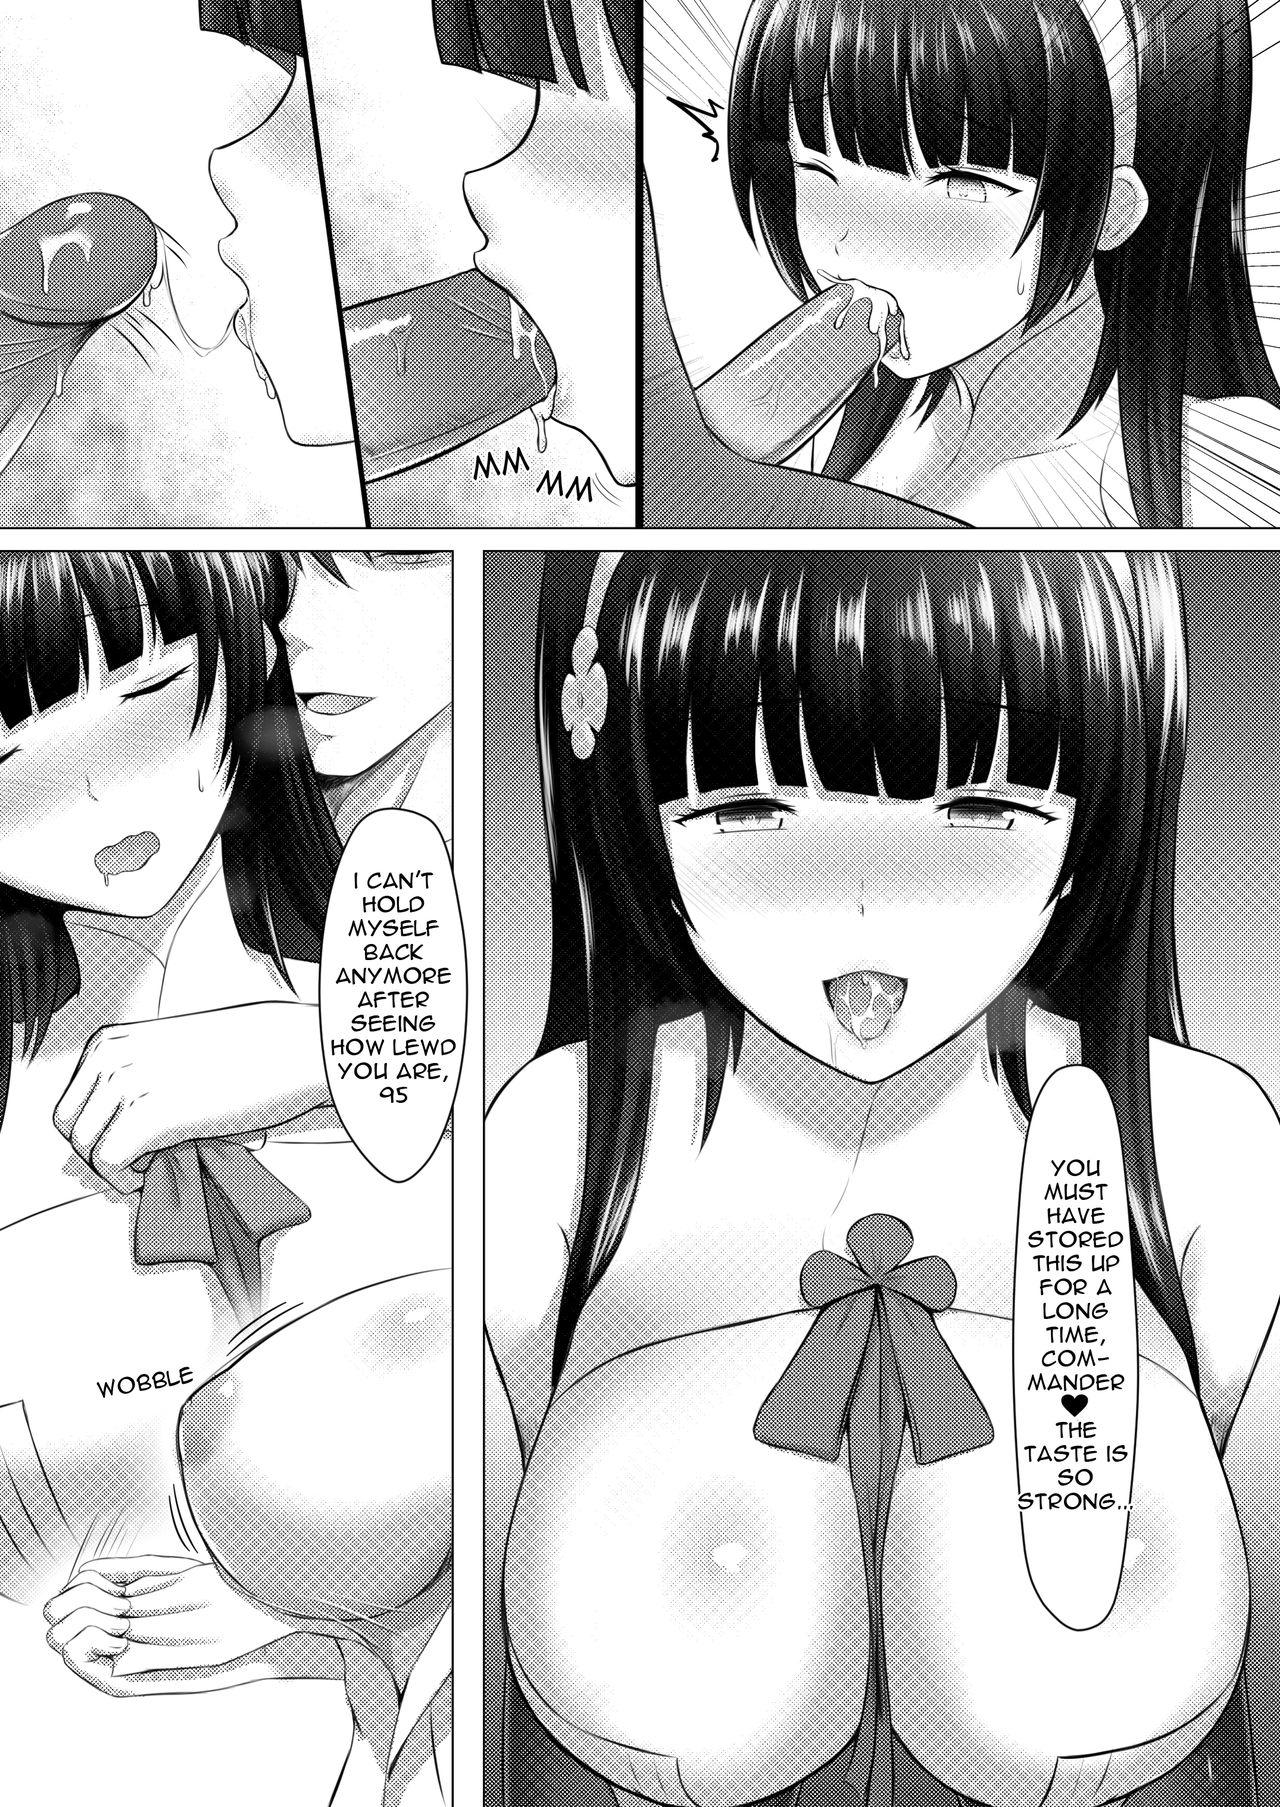 Cock Sucking A Lovely Flower's Gift - Girls frontline Tight Pussy - Page 10